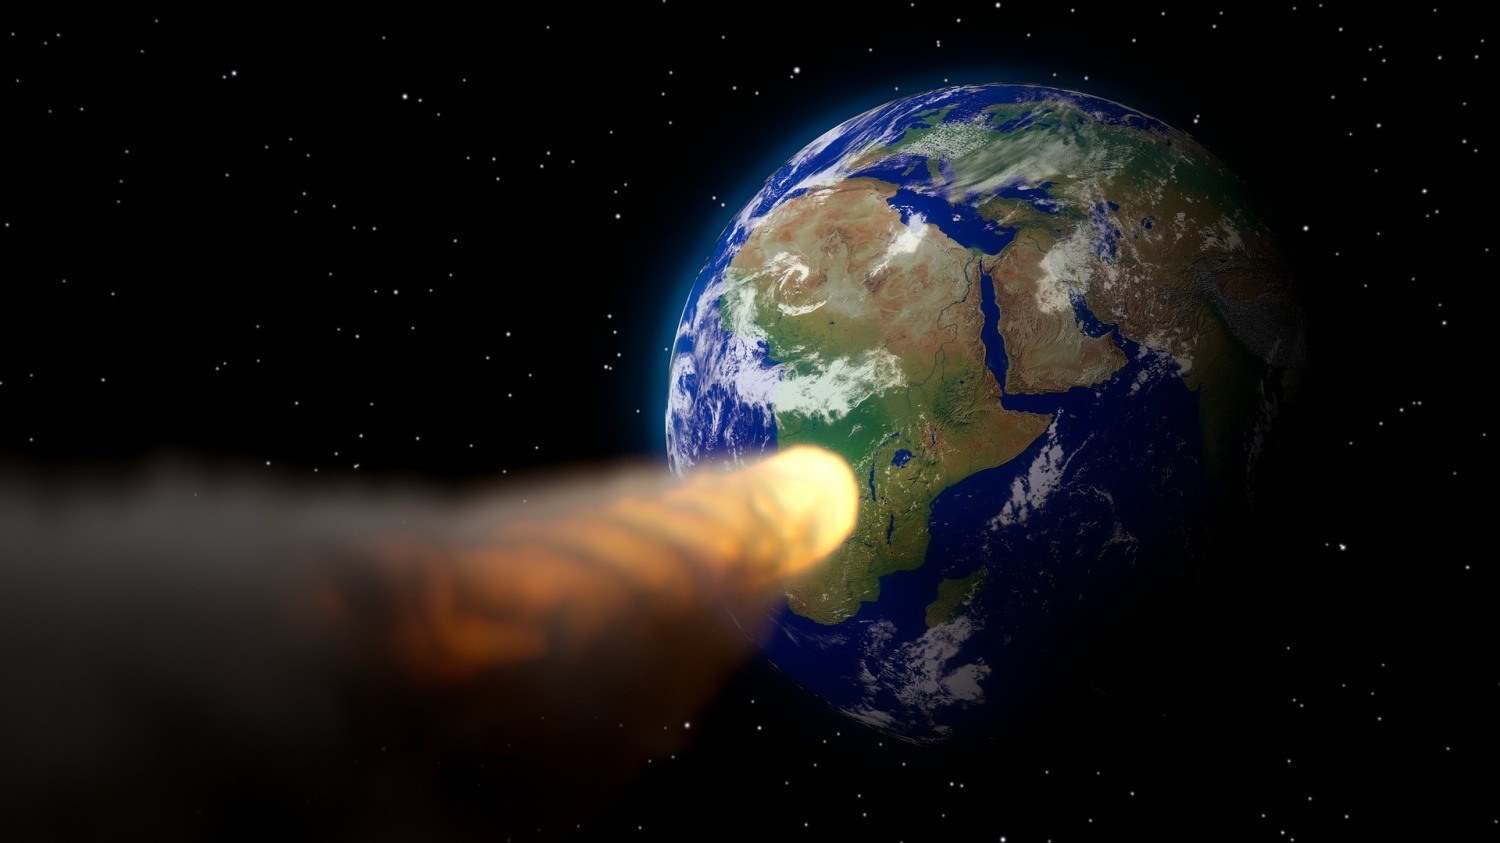 Evidence Reveals Cosmic Impact Wiped Out Early Human Settlements